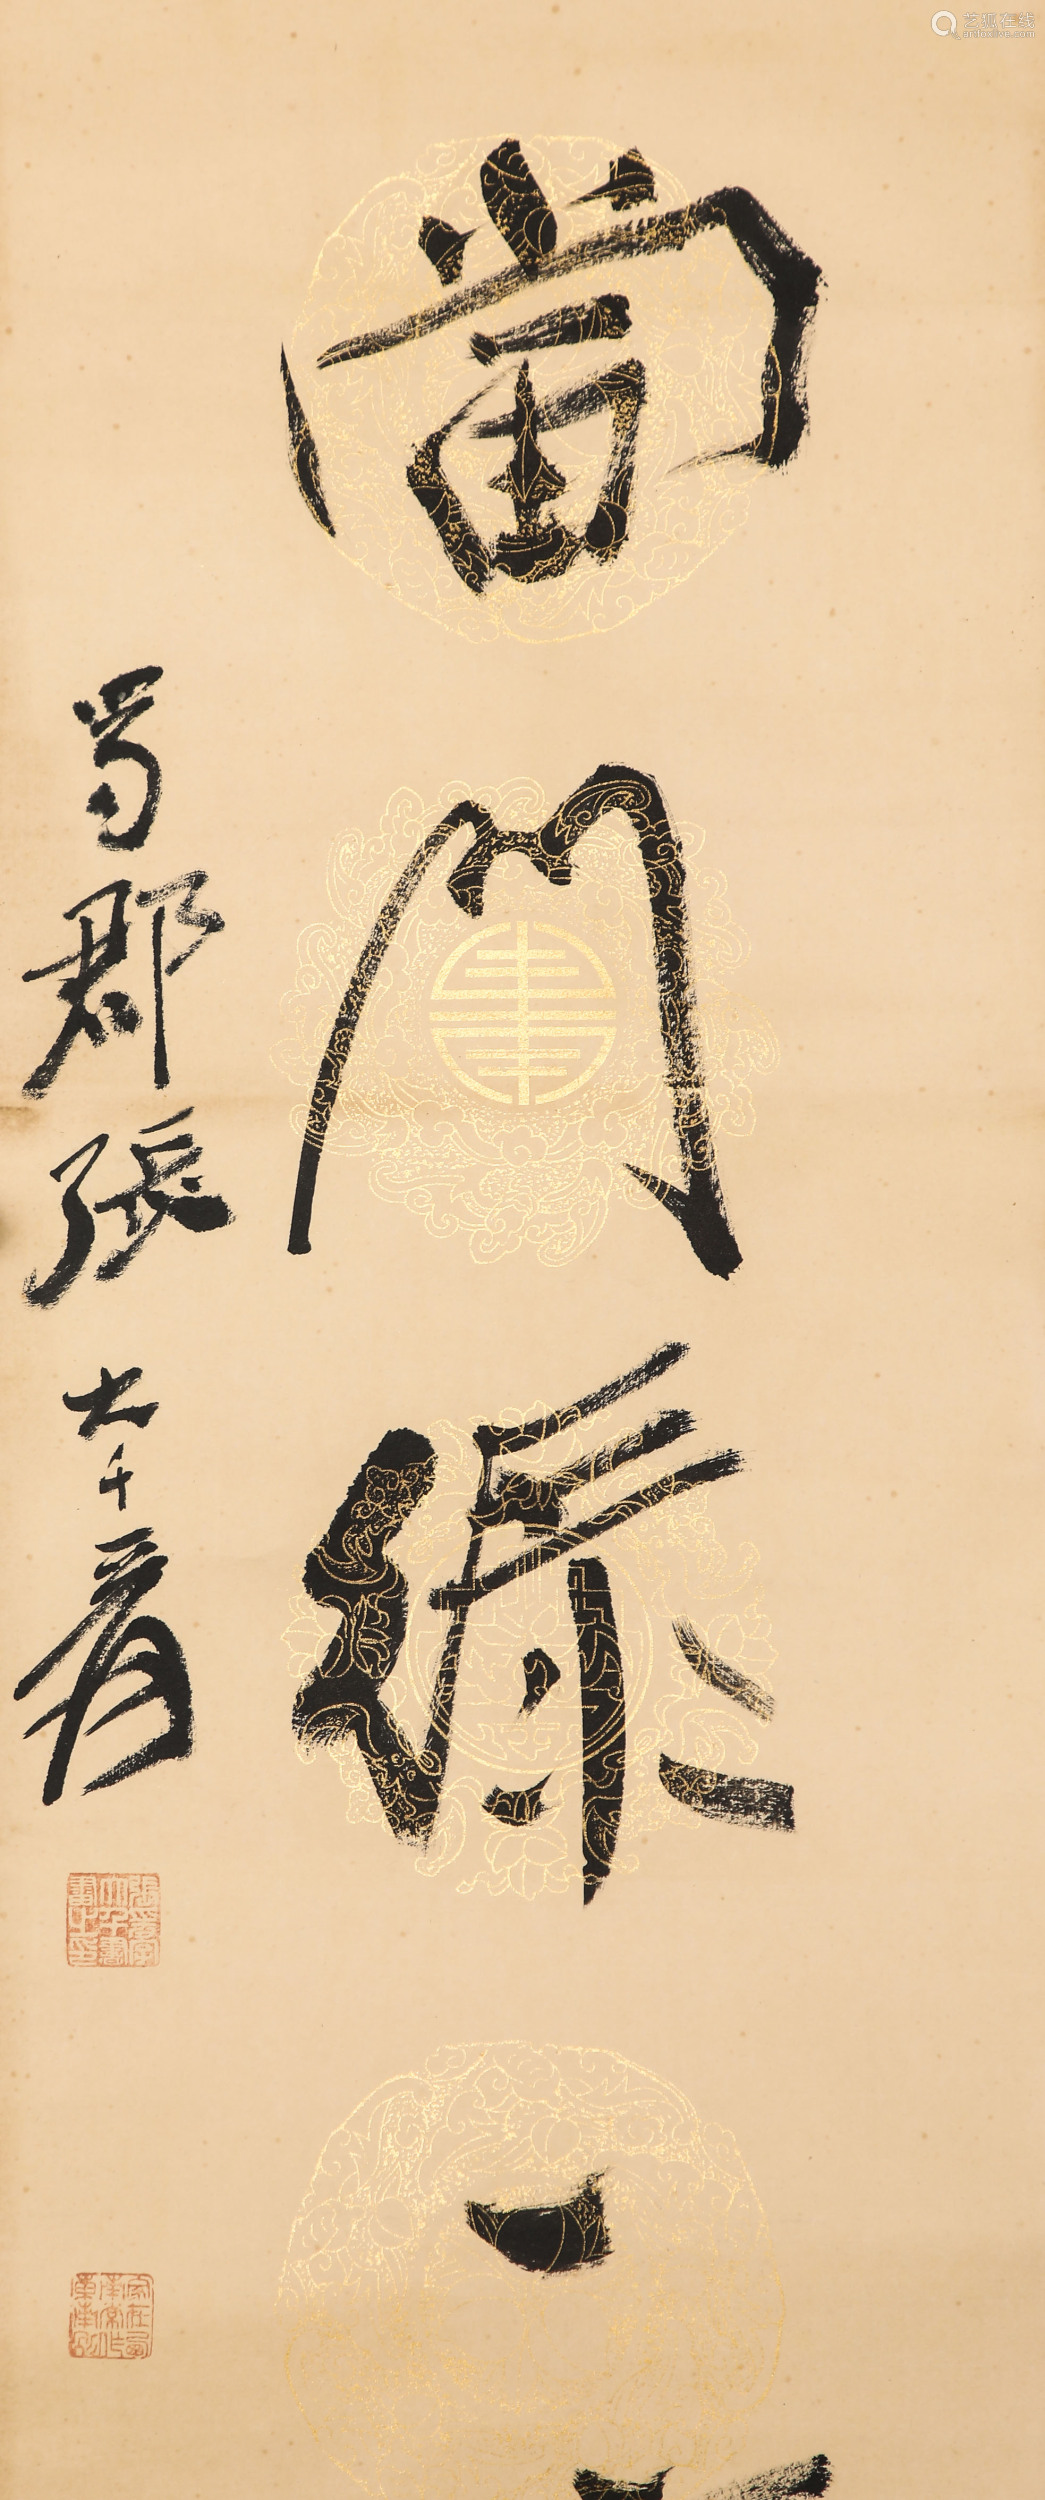 Chinese ink painting,
Zhang Daqian's seven-character couplet